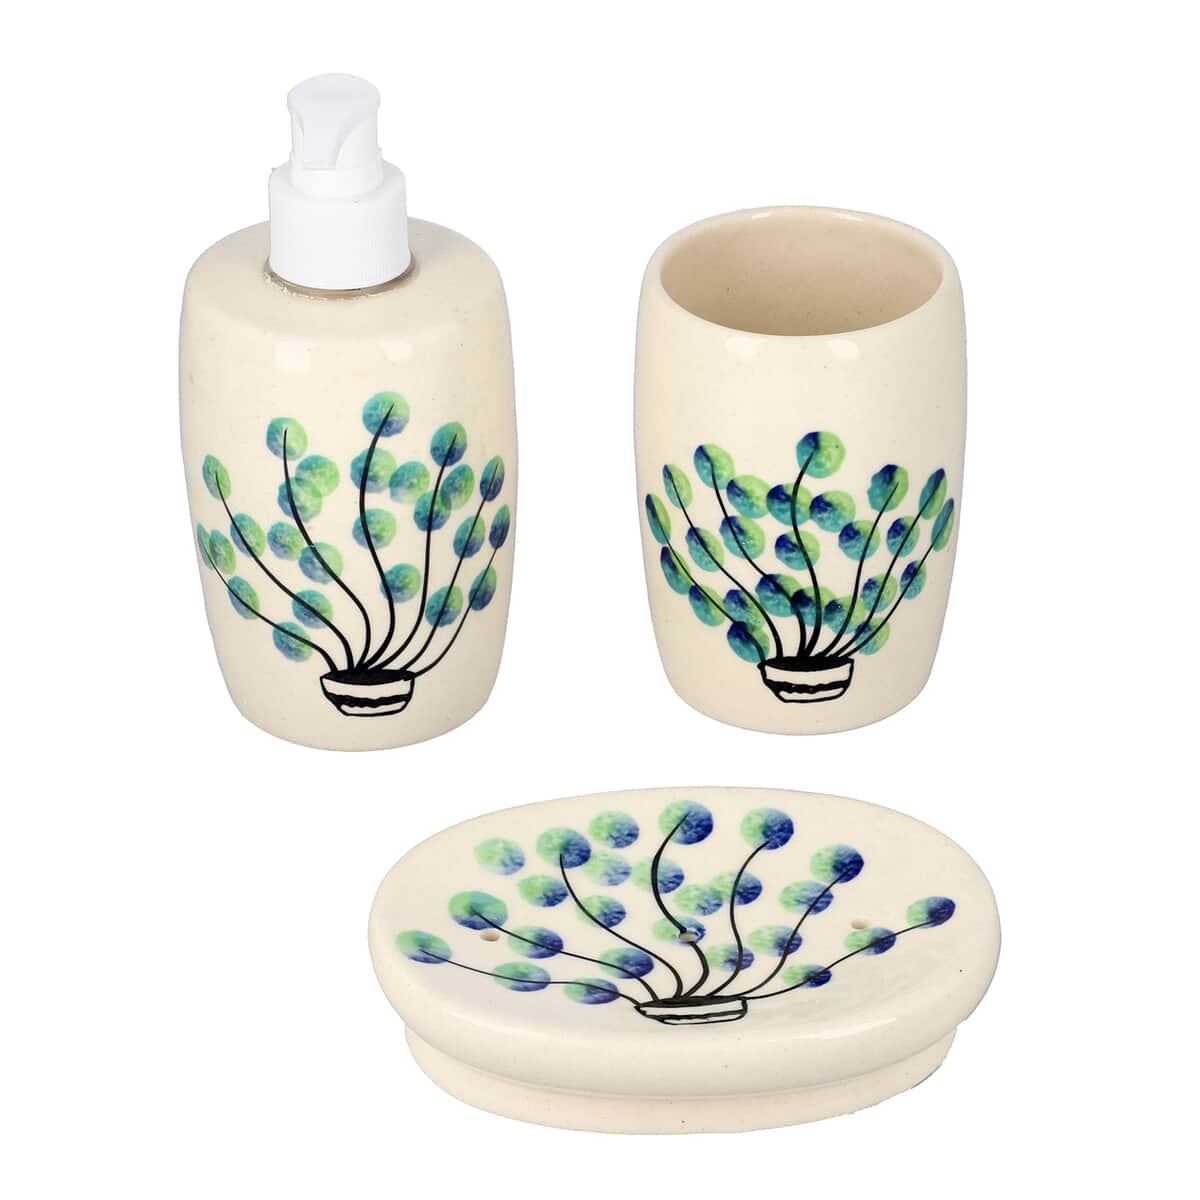 Set of 3 Ceramic Bathroom Accessory Liquid Soap Dispenser, Soap Tray & Tumbler - Green and White image number 0